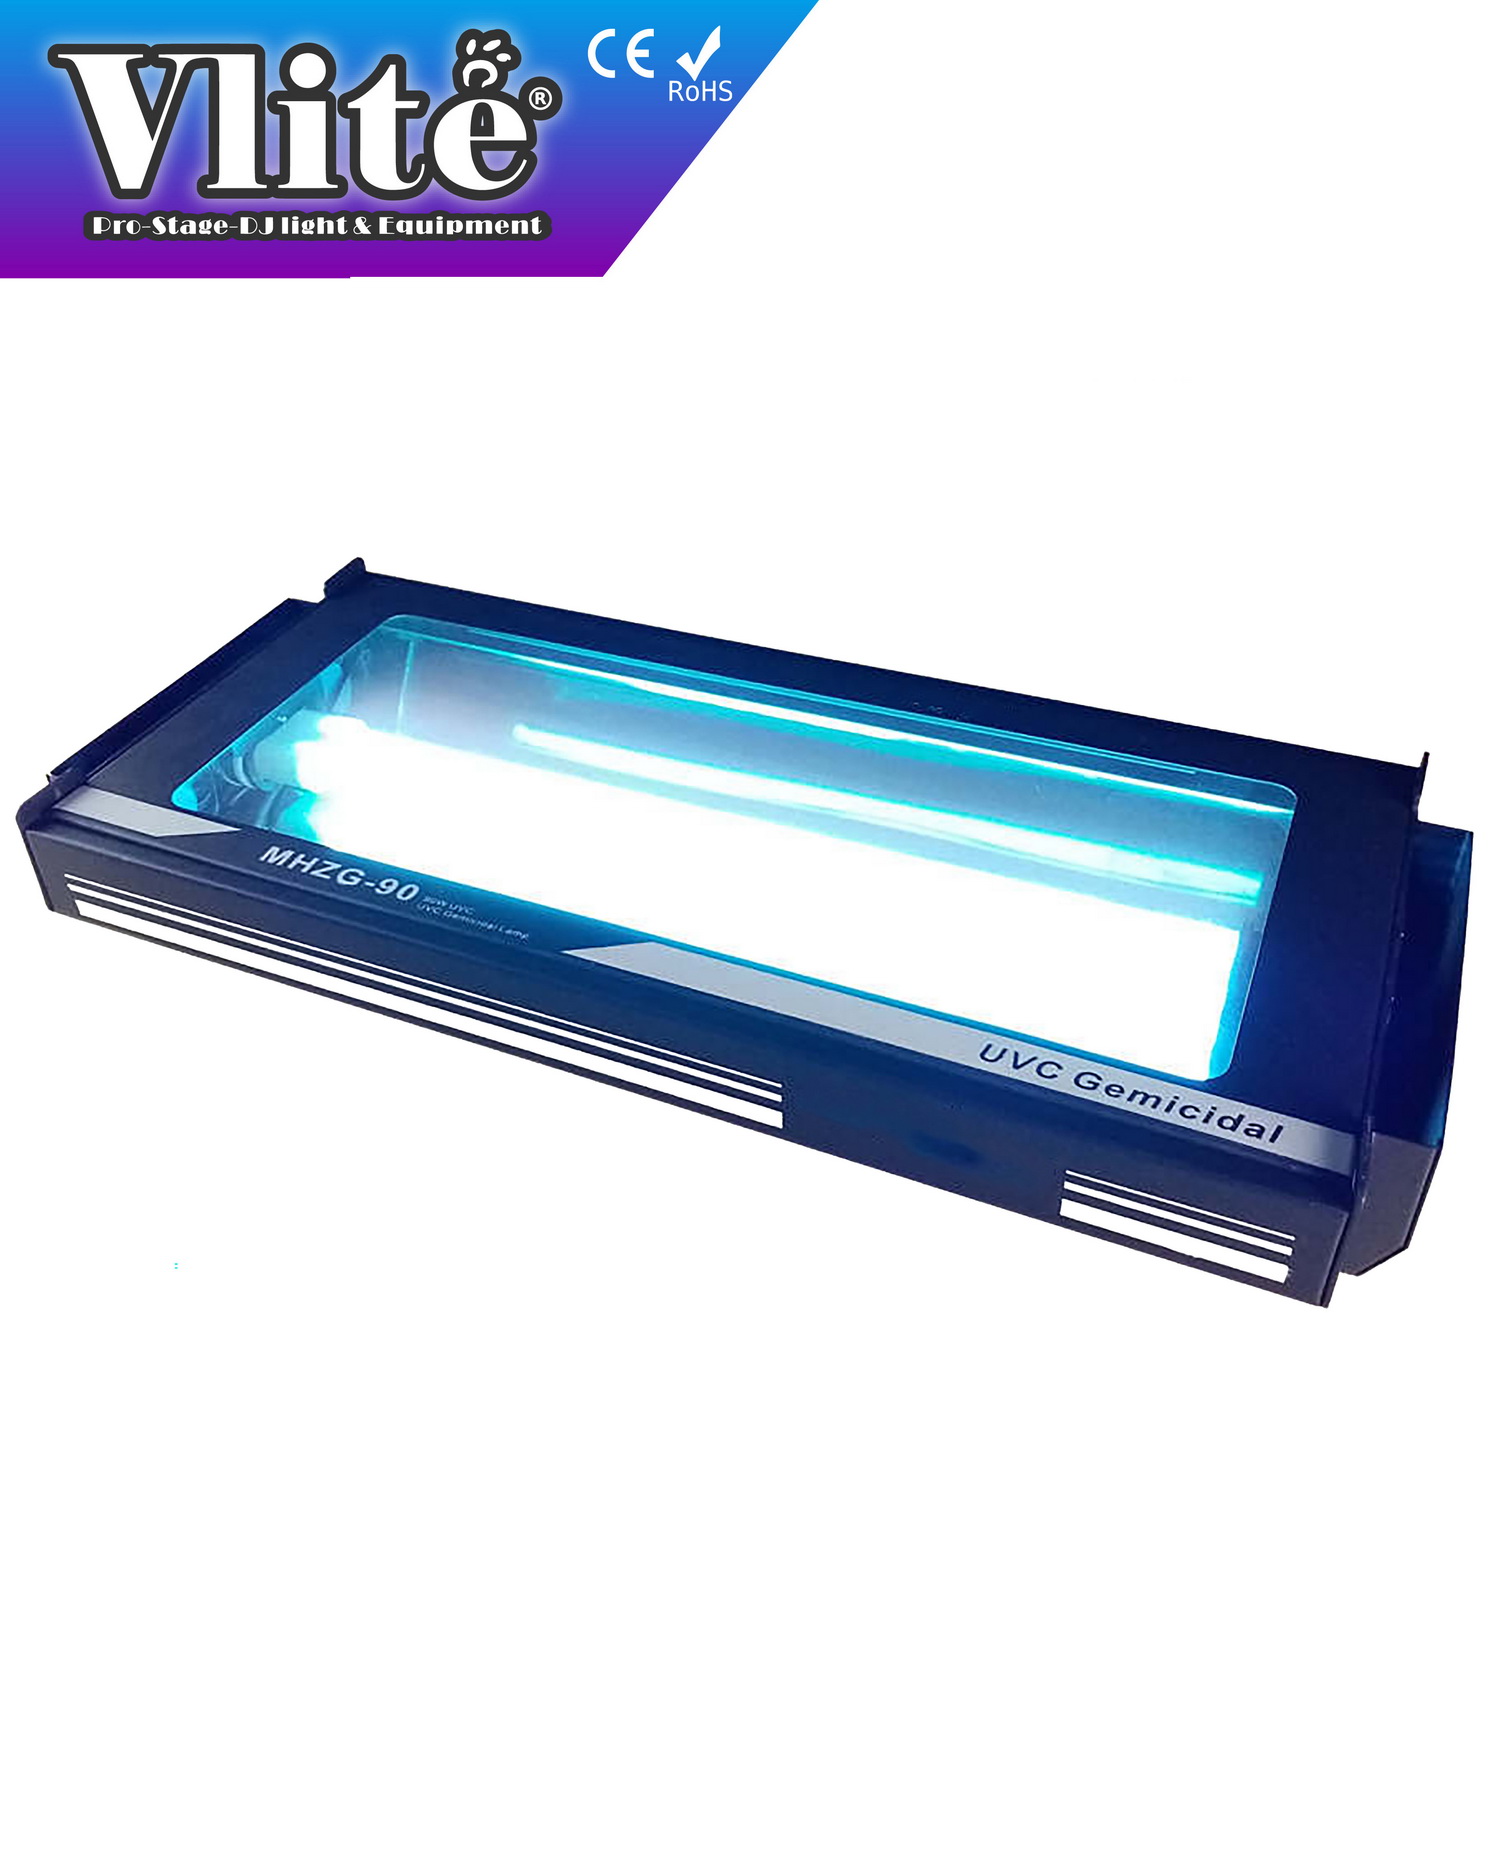 MHZG-90 Disinfection Lamp